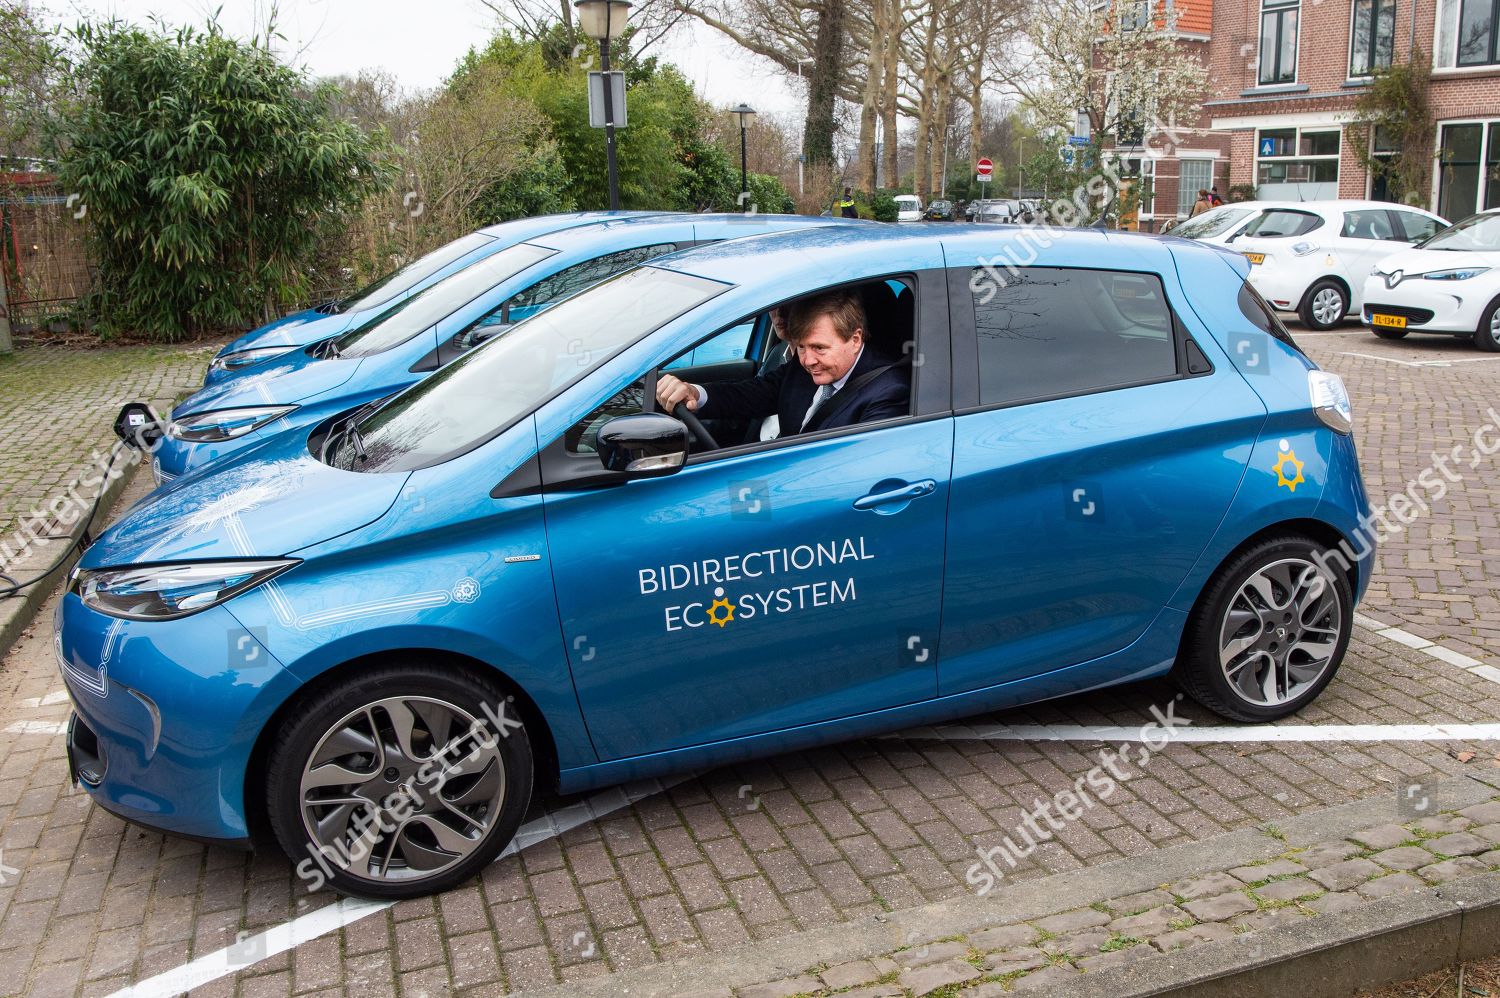 energy-and-mobility-system-launch-utrecht-netherlands-shutterstock-editorial-10163017t.jpg